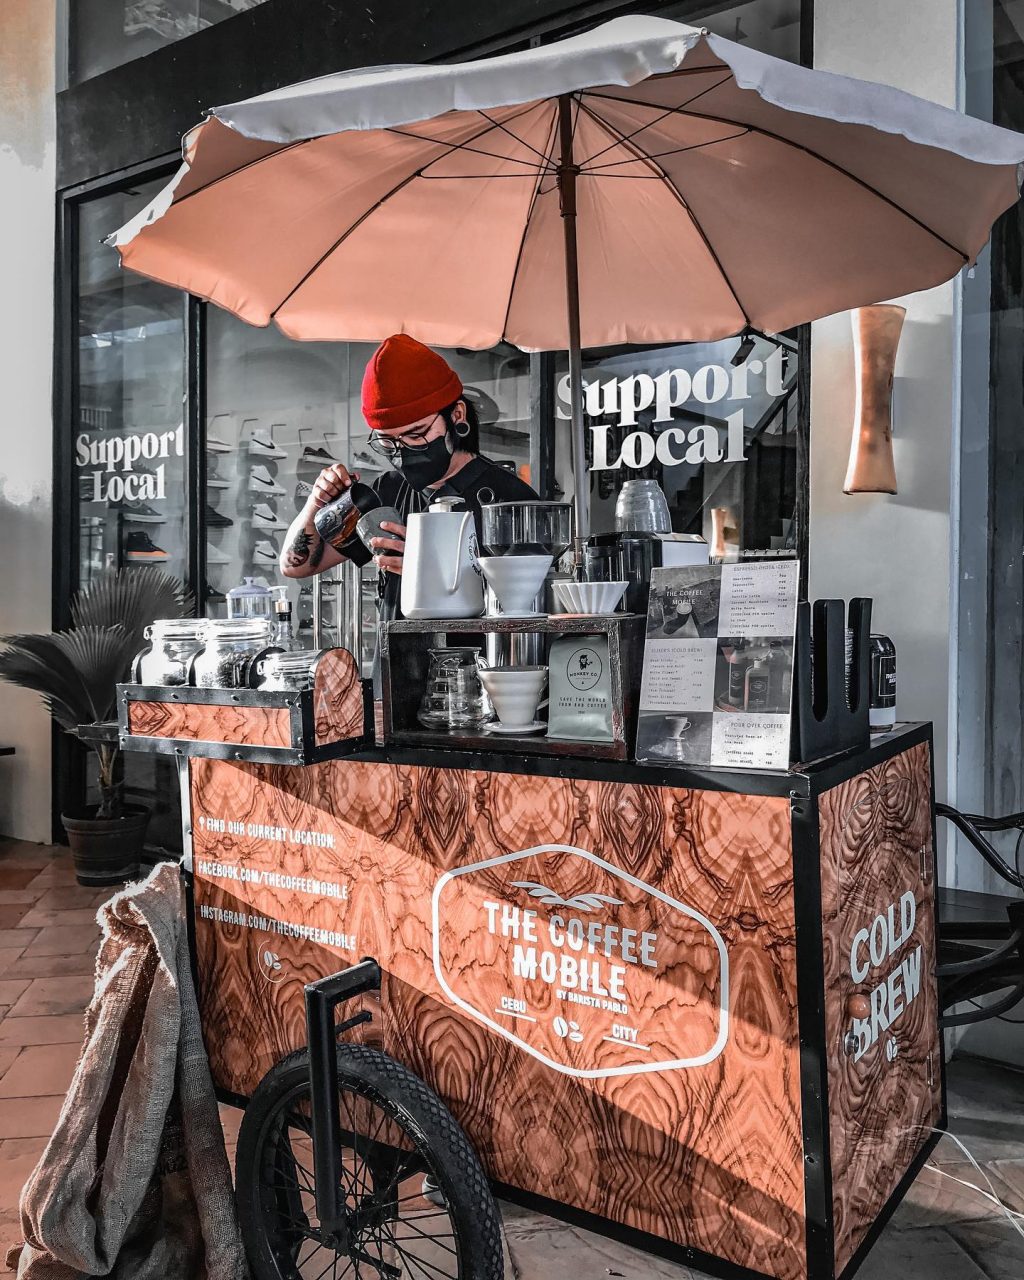 Connecting People on the streets with The Coffee Mobile